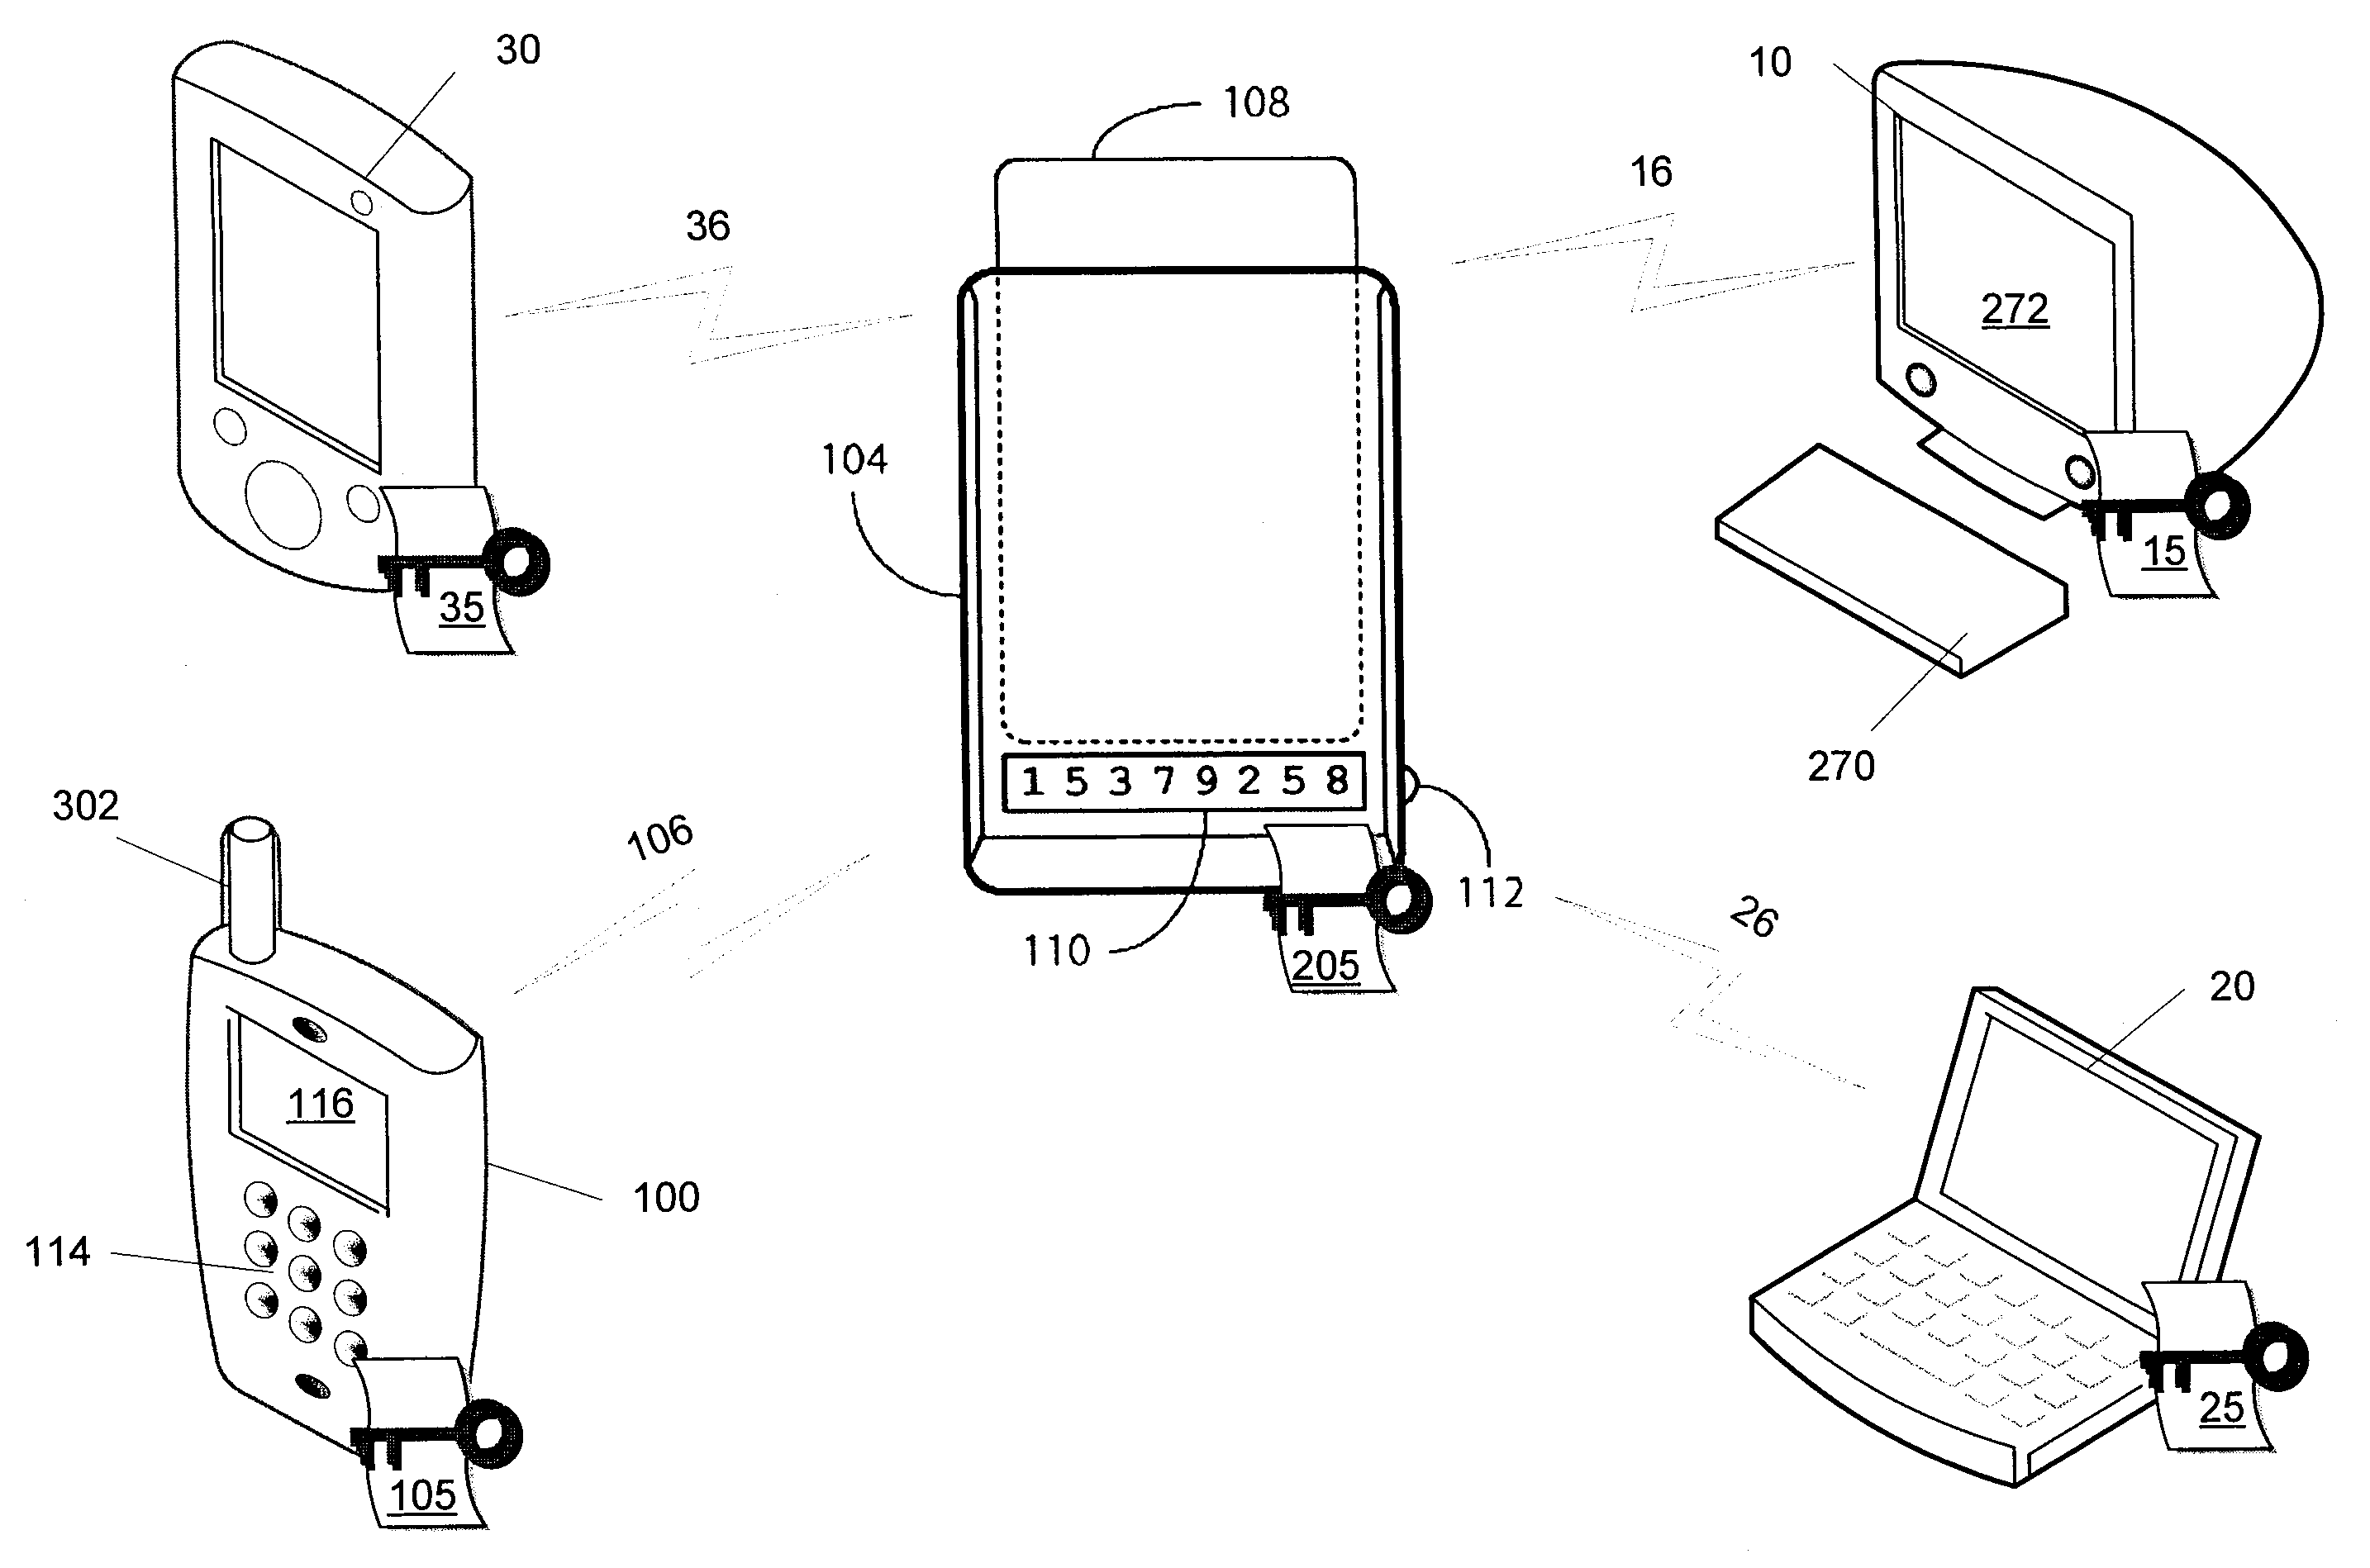 Management of multiple connections to a security token access device